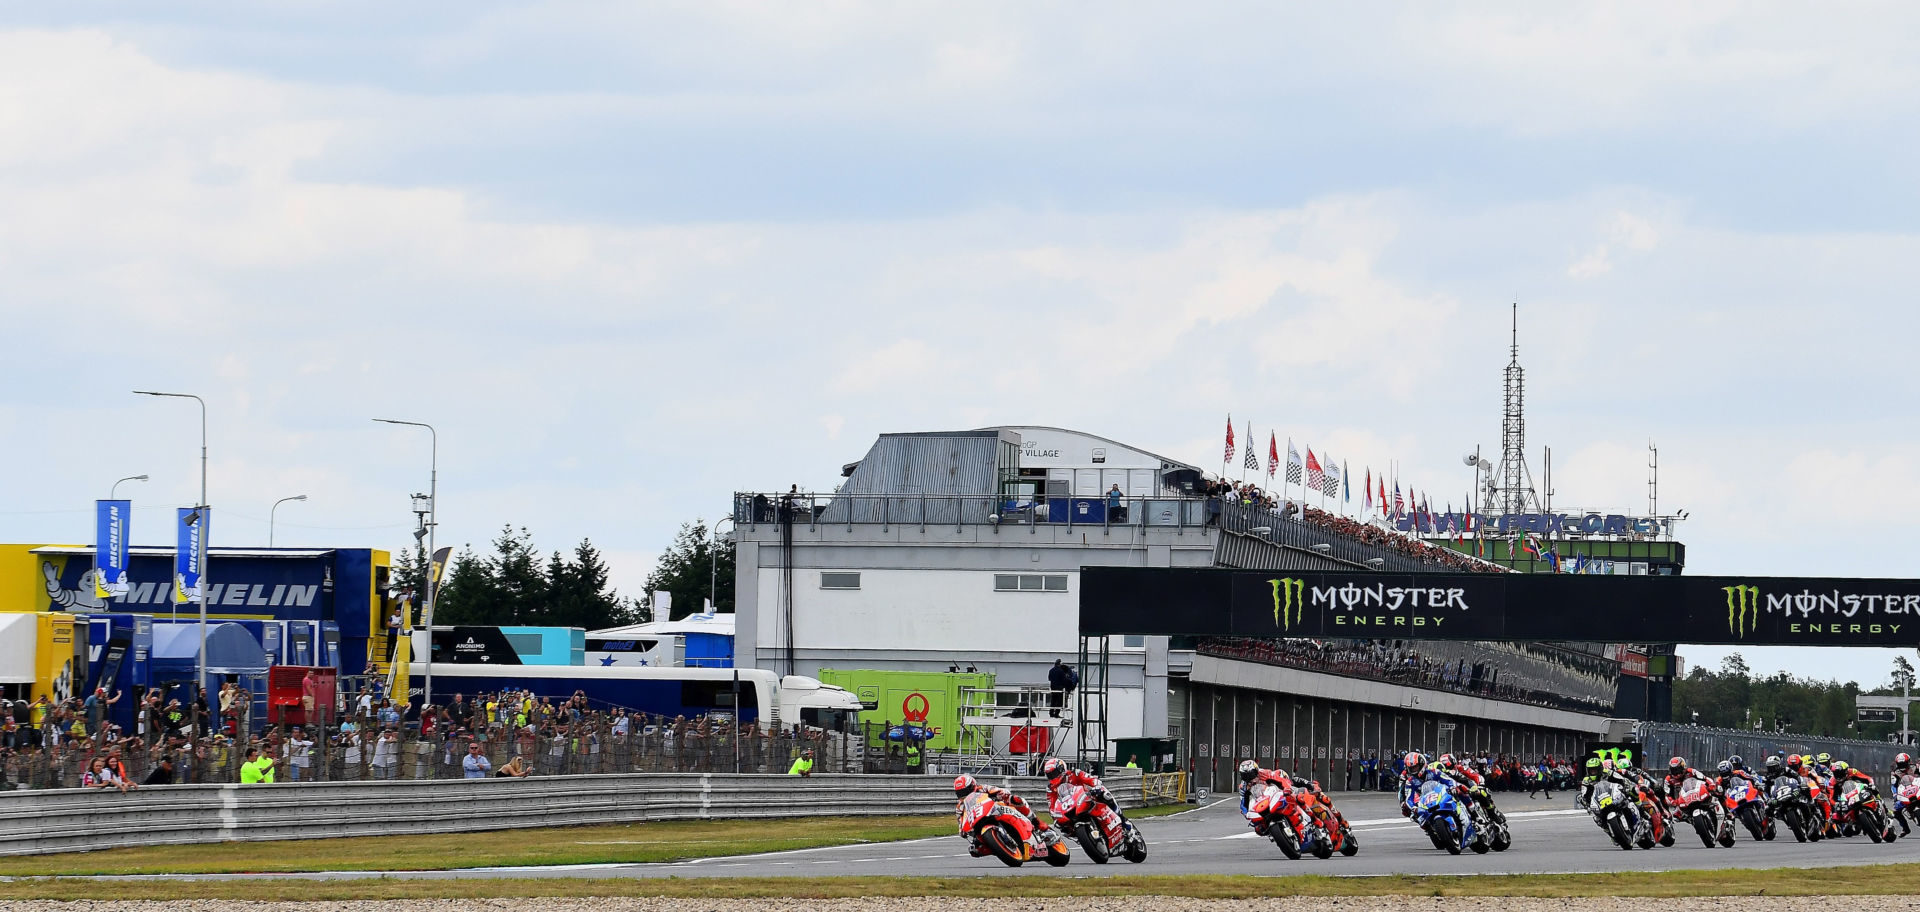 The start of the MotoGP race at Brno in 2019. Photo courtesy Michelin.